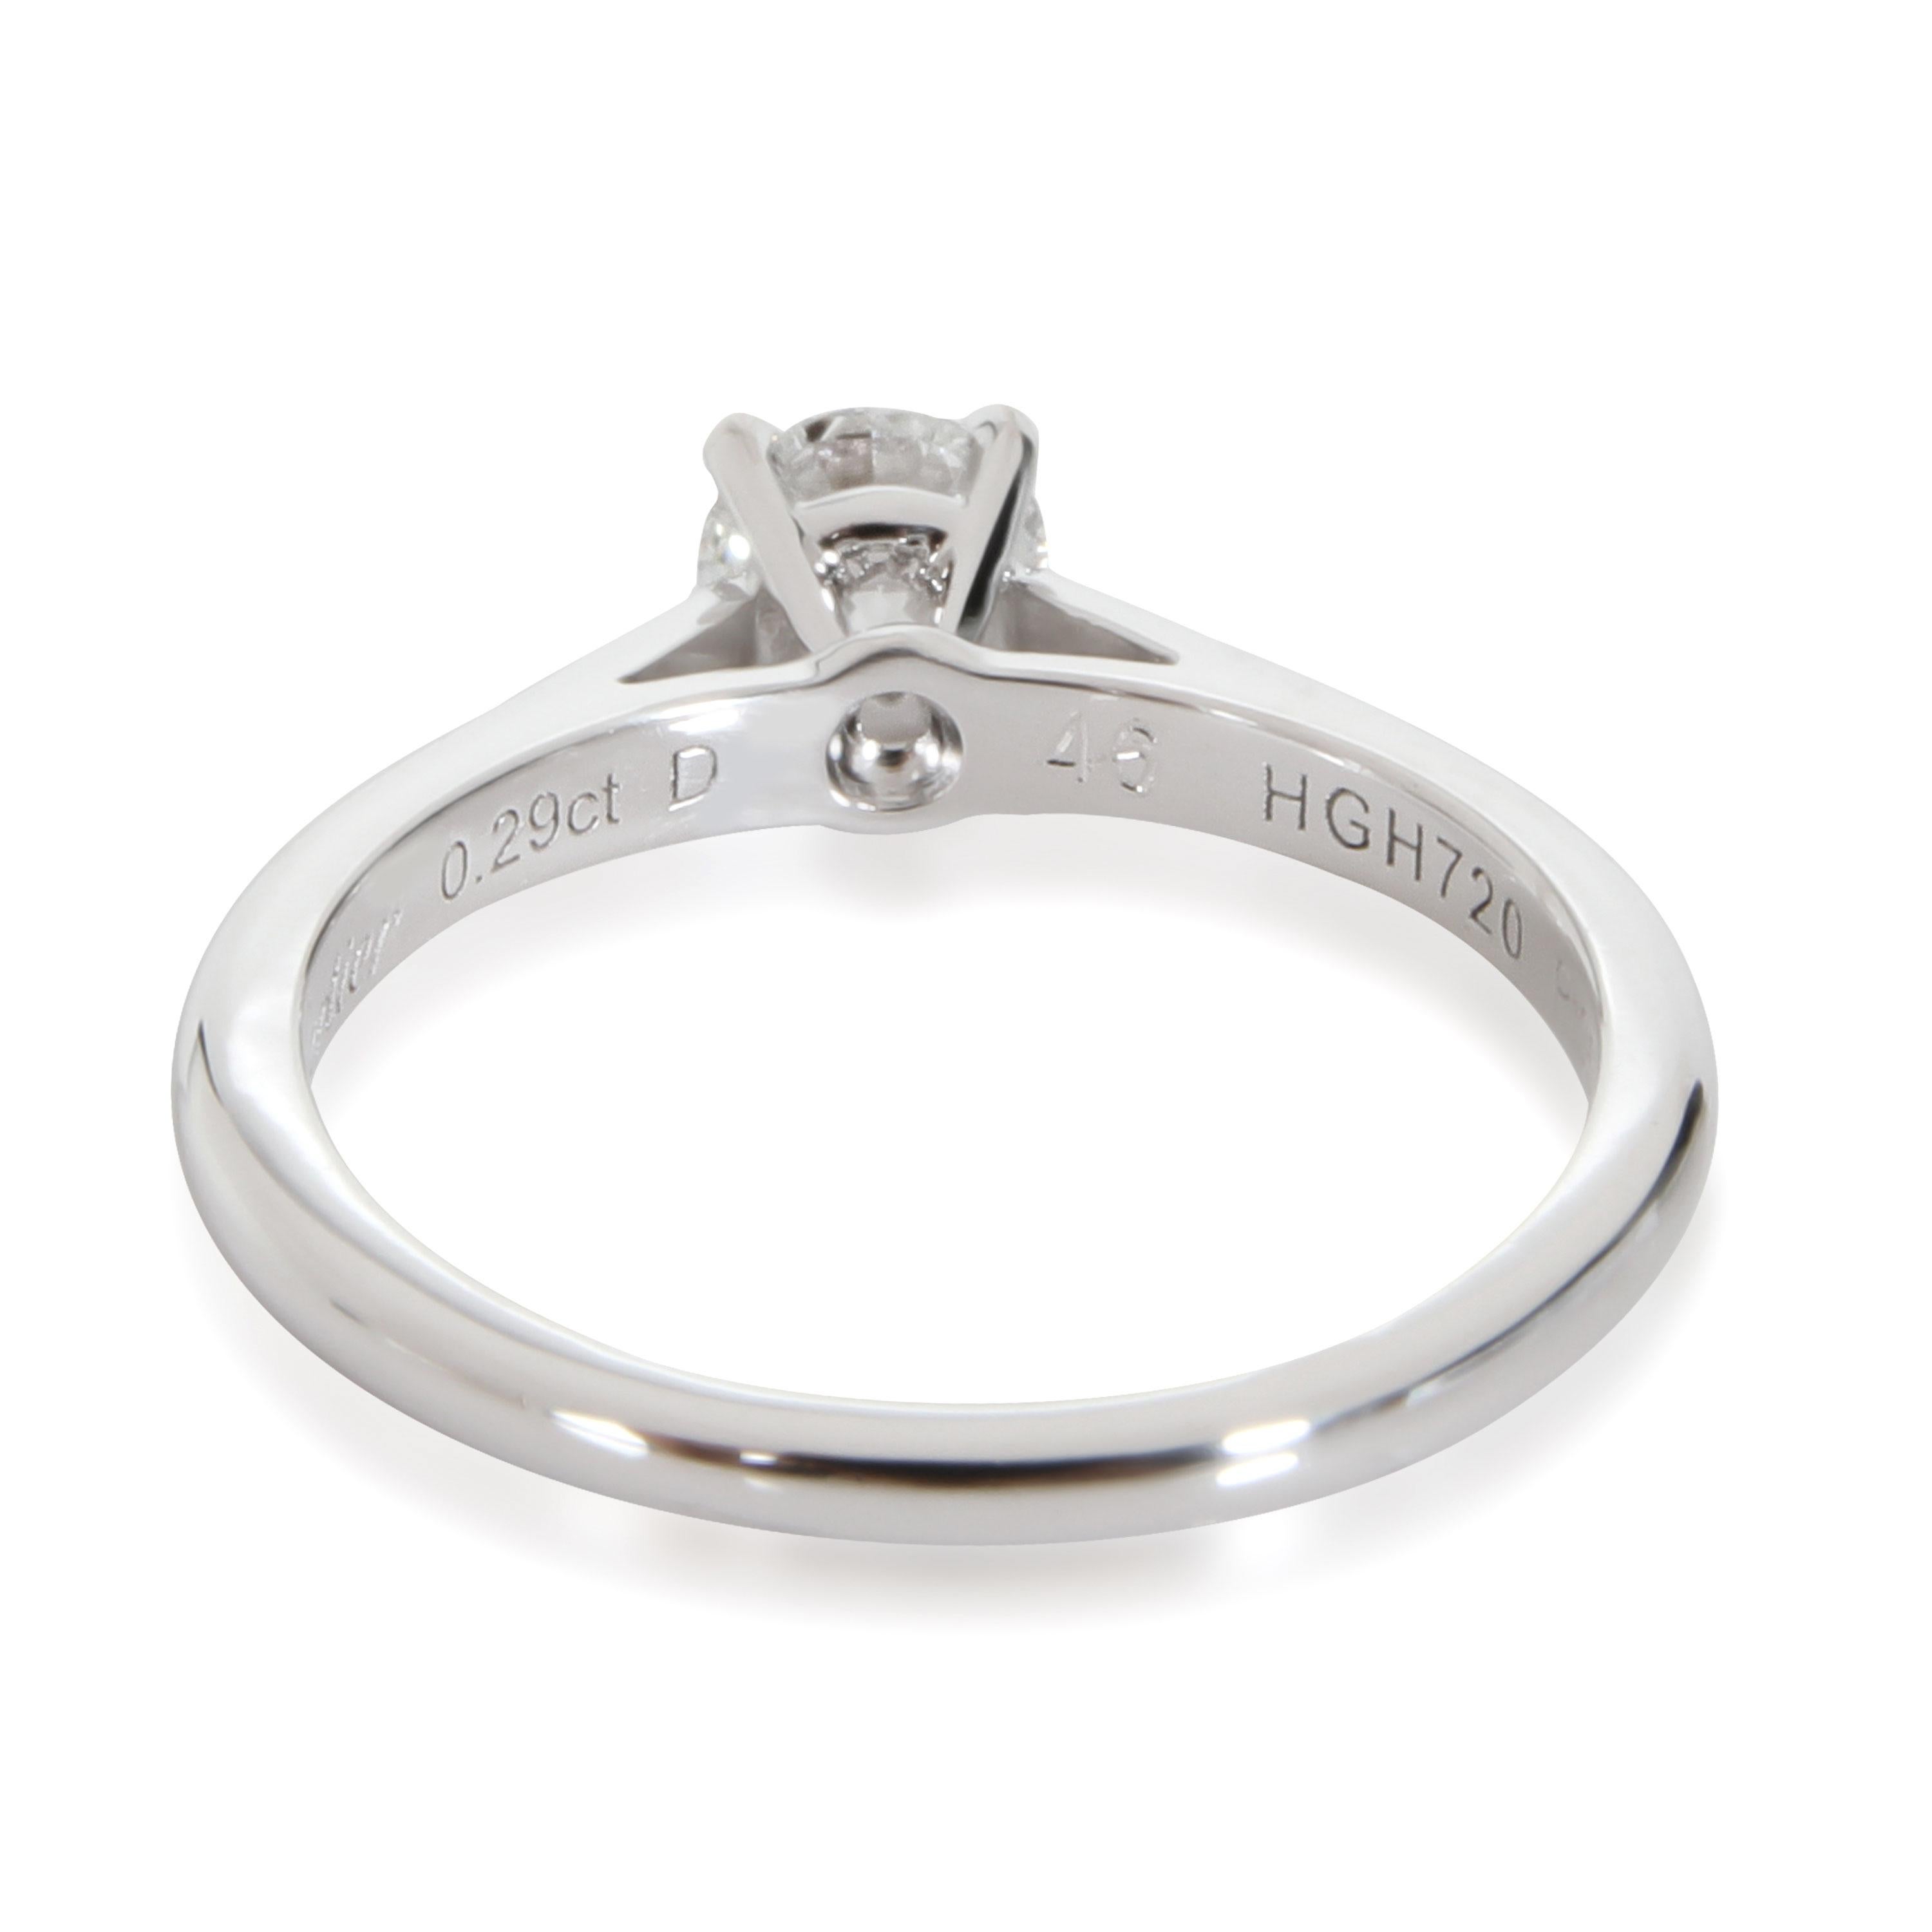 Cartier 1895 Diamond Engagement Ring in Platinum D VVS1 0.29 CTW

PRIMARY DETAILS
SKU: 112139
Listing Title: Cartier 1895 Diamond Engagement Ring in Platinum D VVS1 0.29 CTW
Condition Description: Retails for 3,250 USD. In excellent condition and